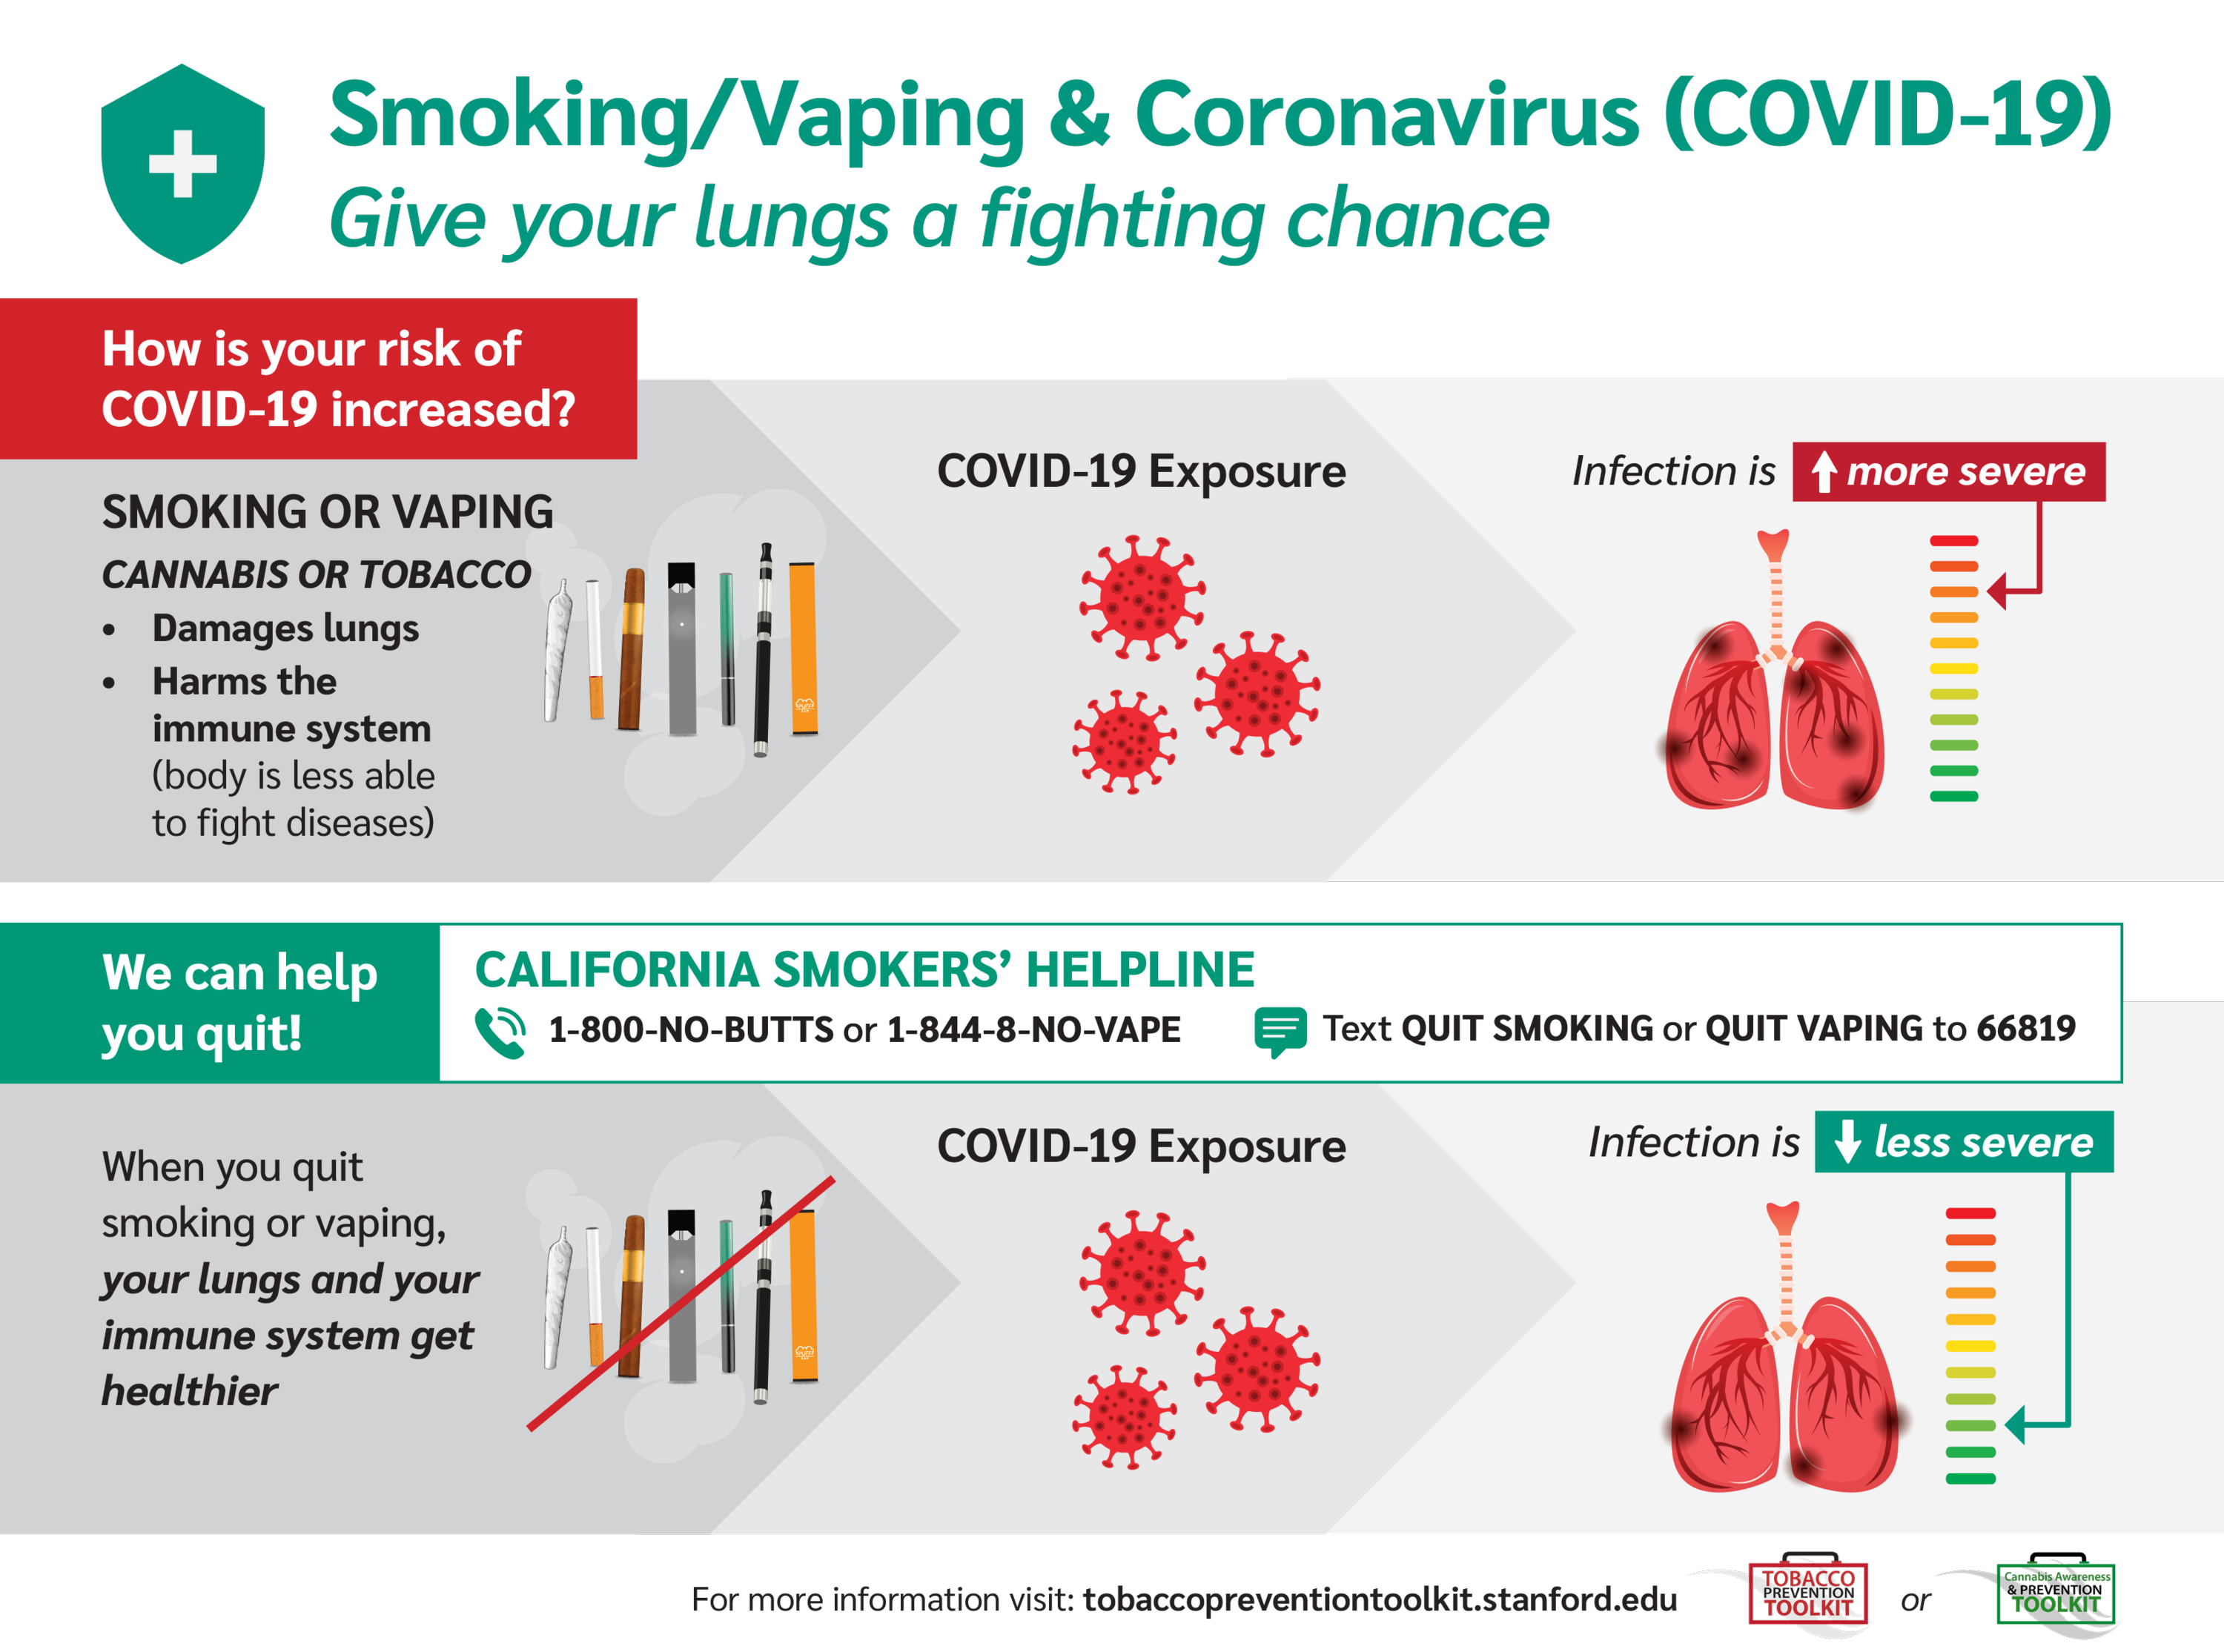 Smoking and Vaping and COVID-19 infographic image